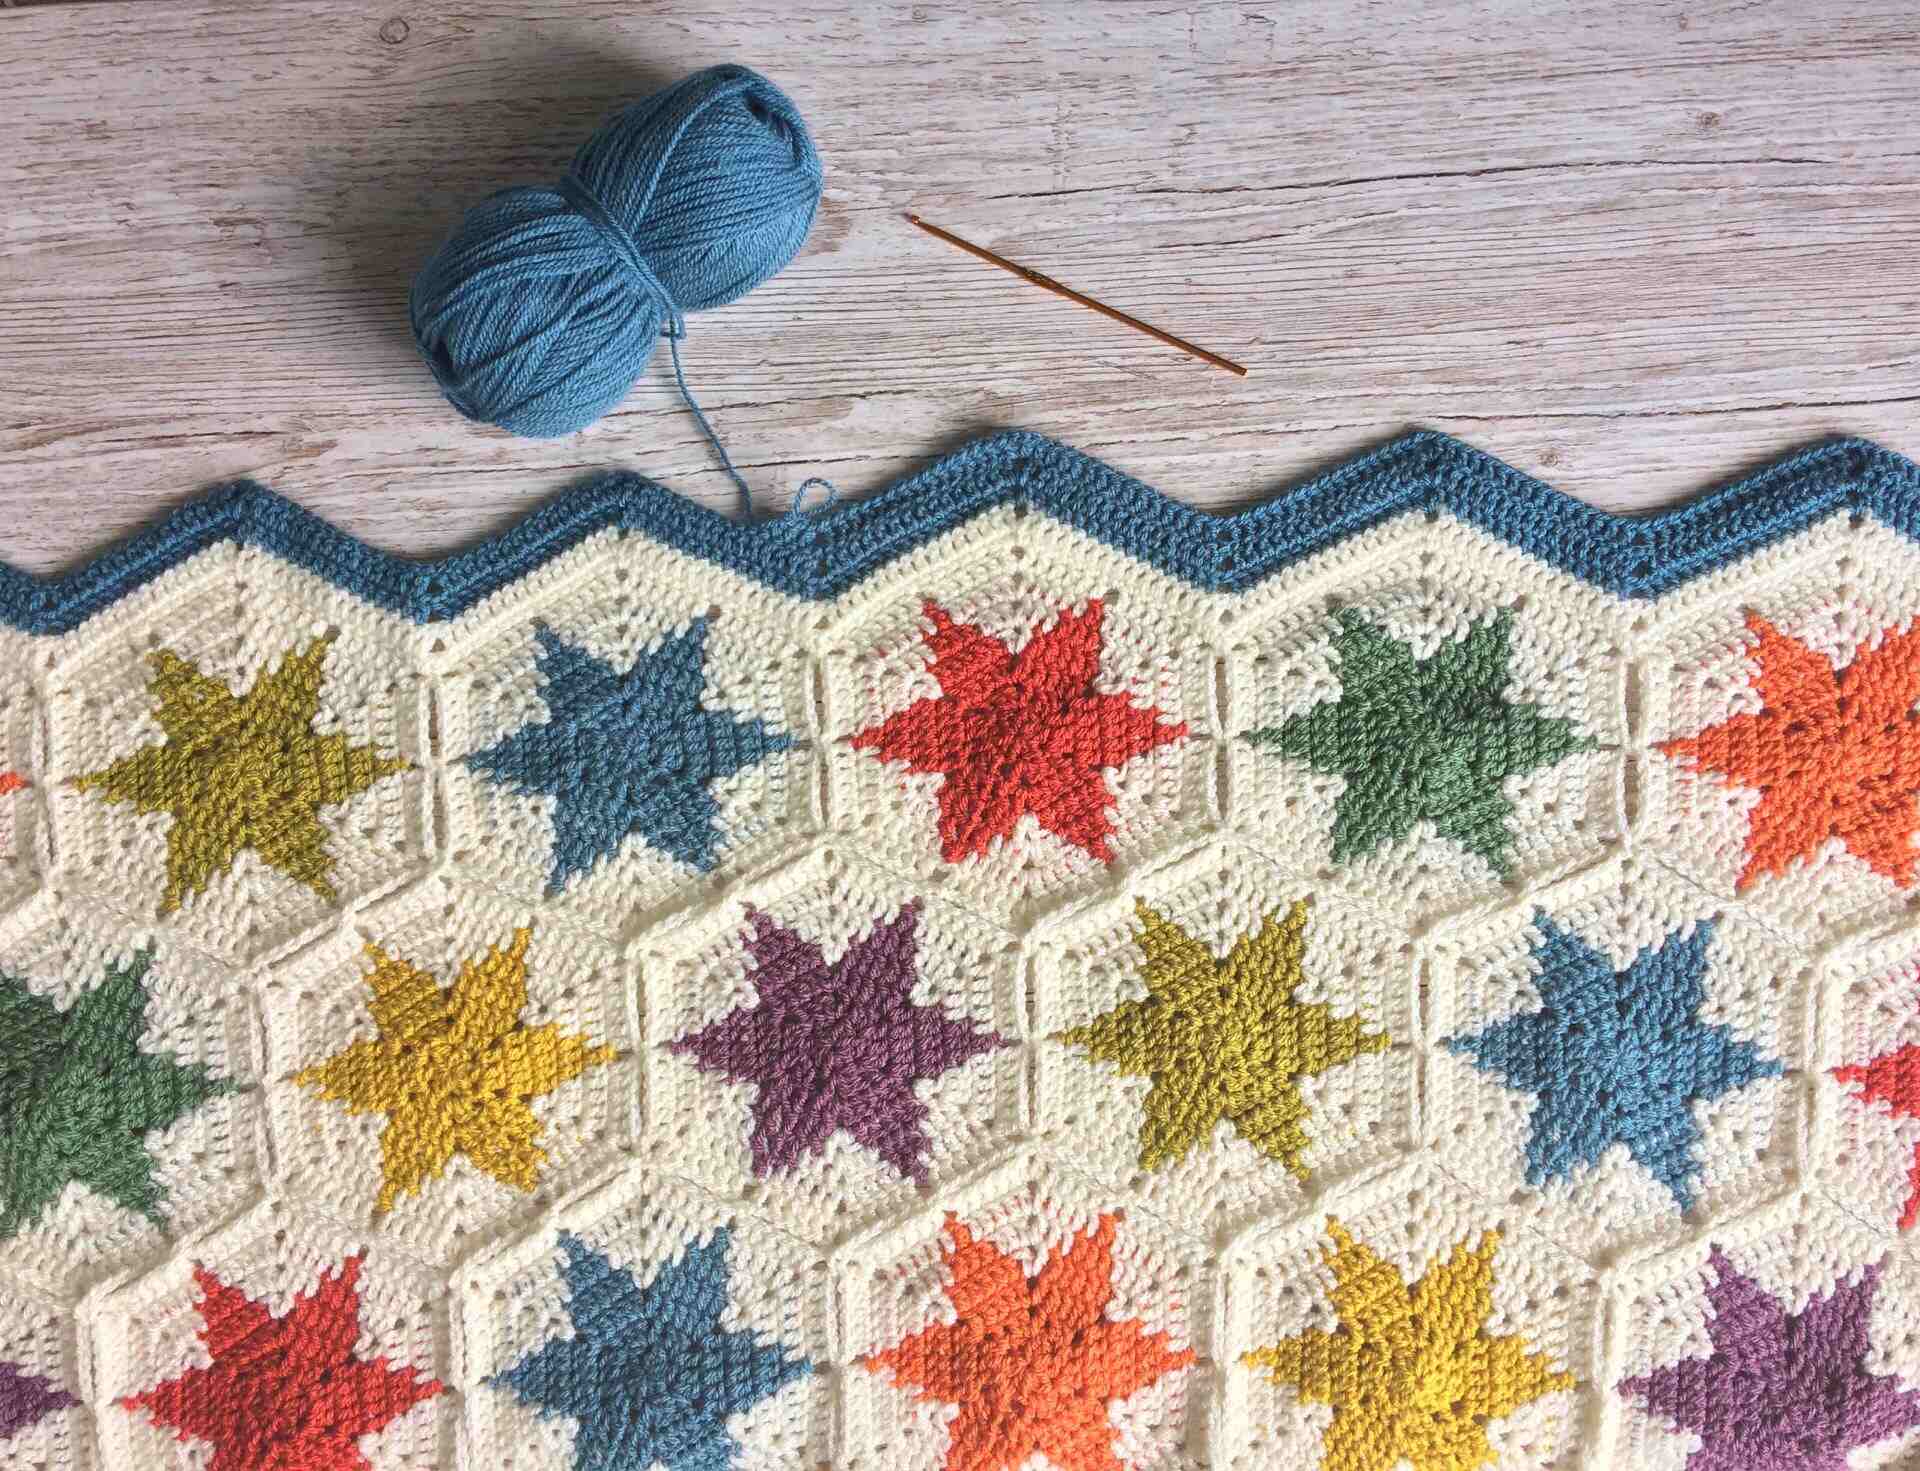 How To Crochet A Star Into A Blanket